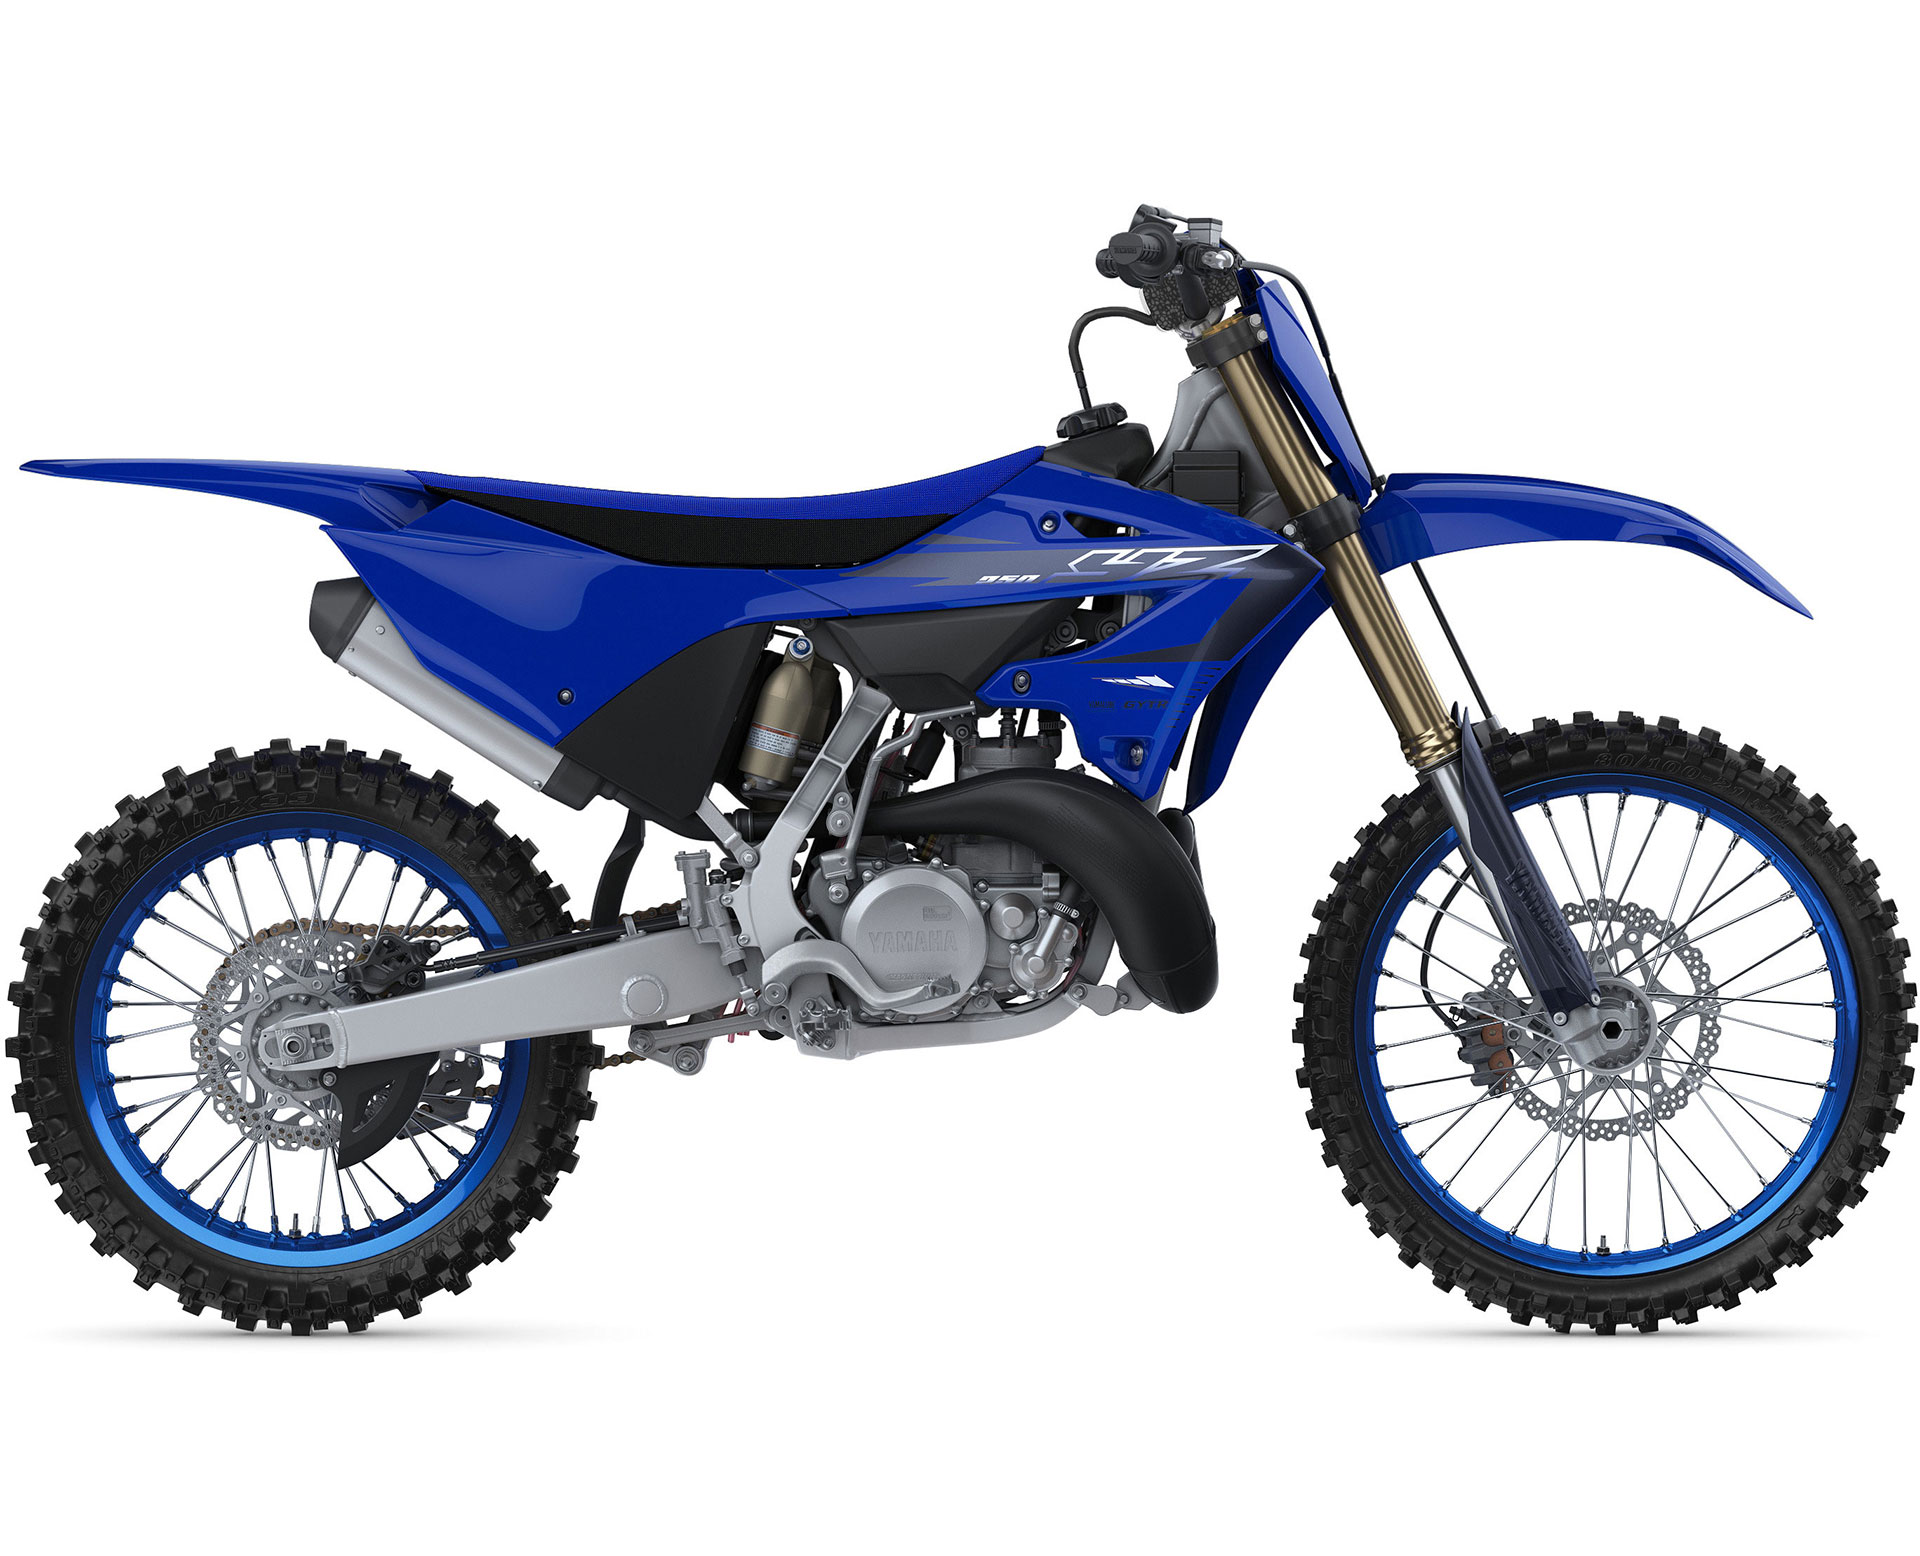 Thumbnail of your customized 2023 YZ250